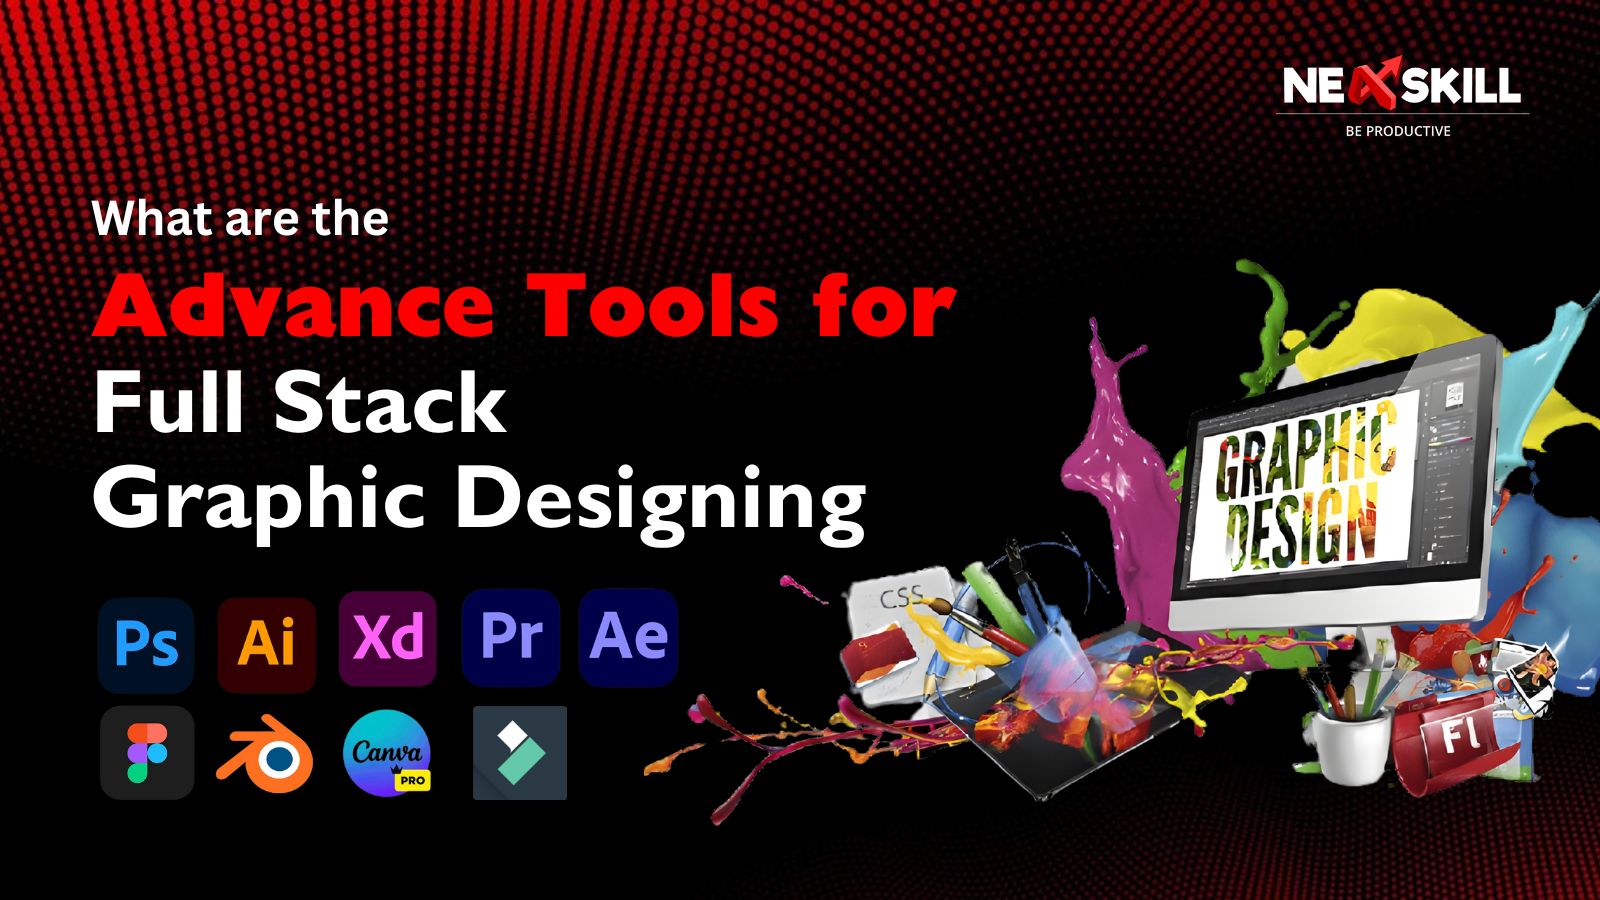 What are the Advanced Tools Required for Full Stack Graphic Designing?